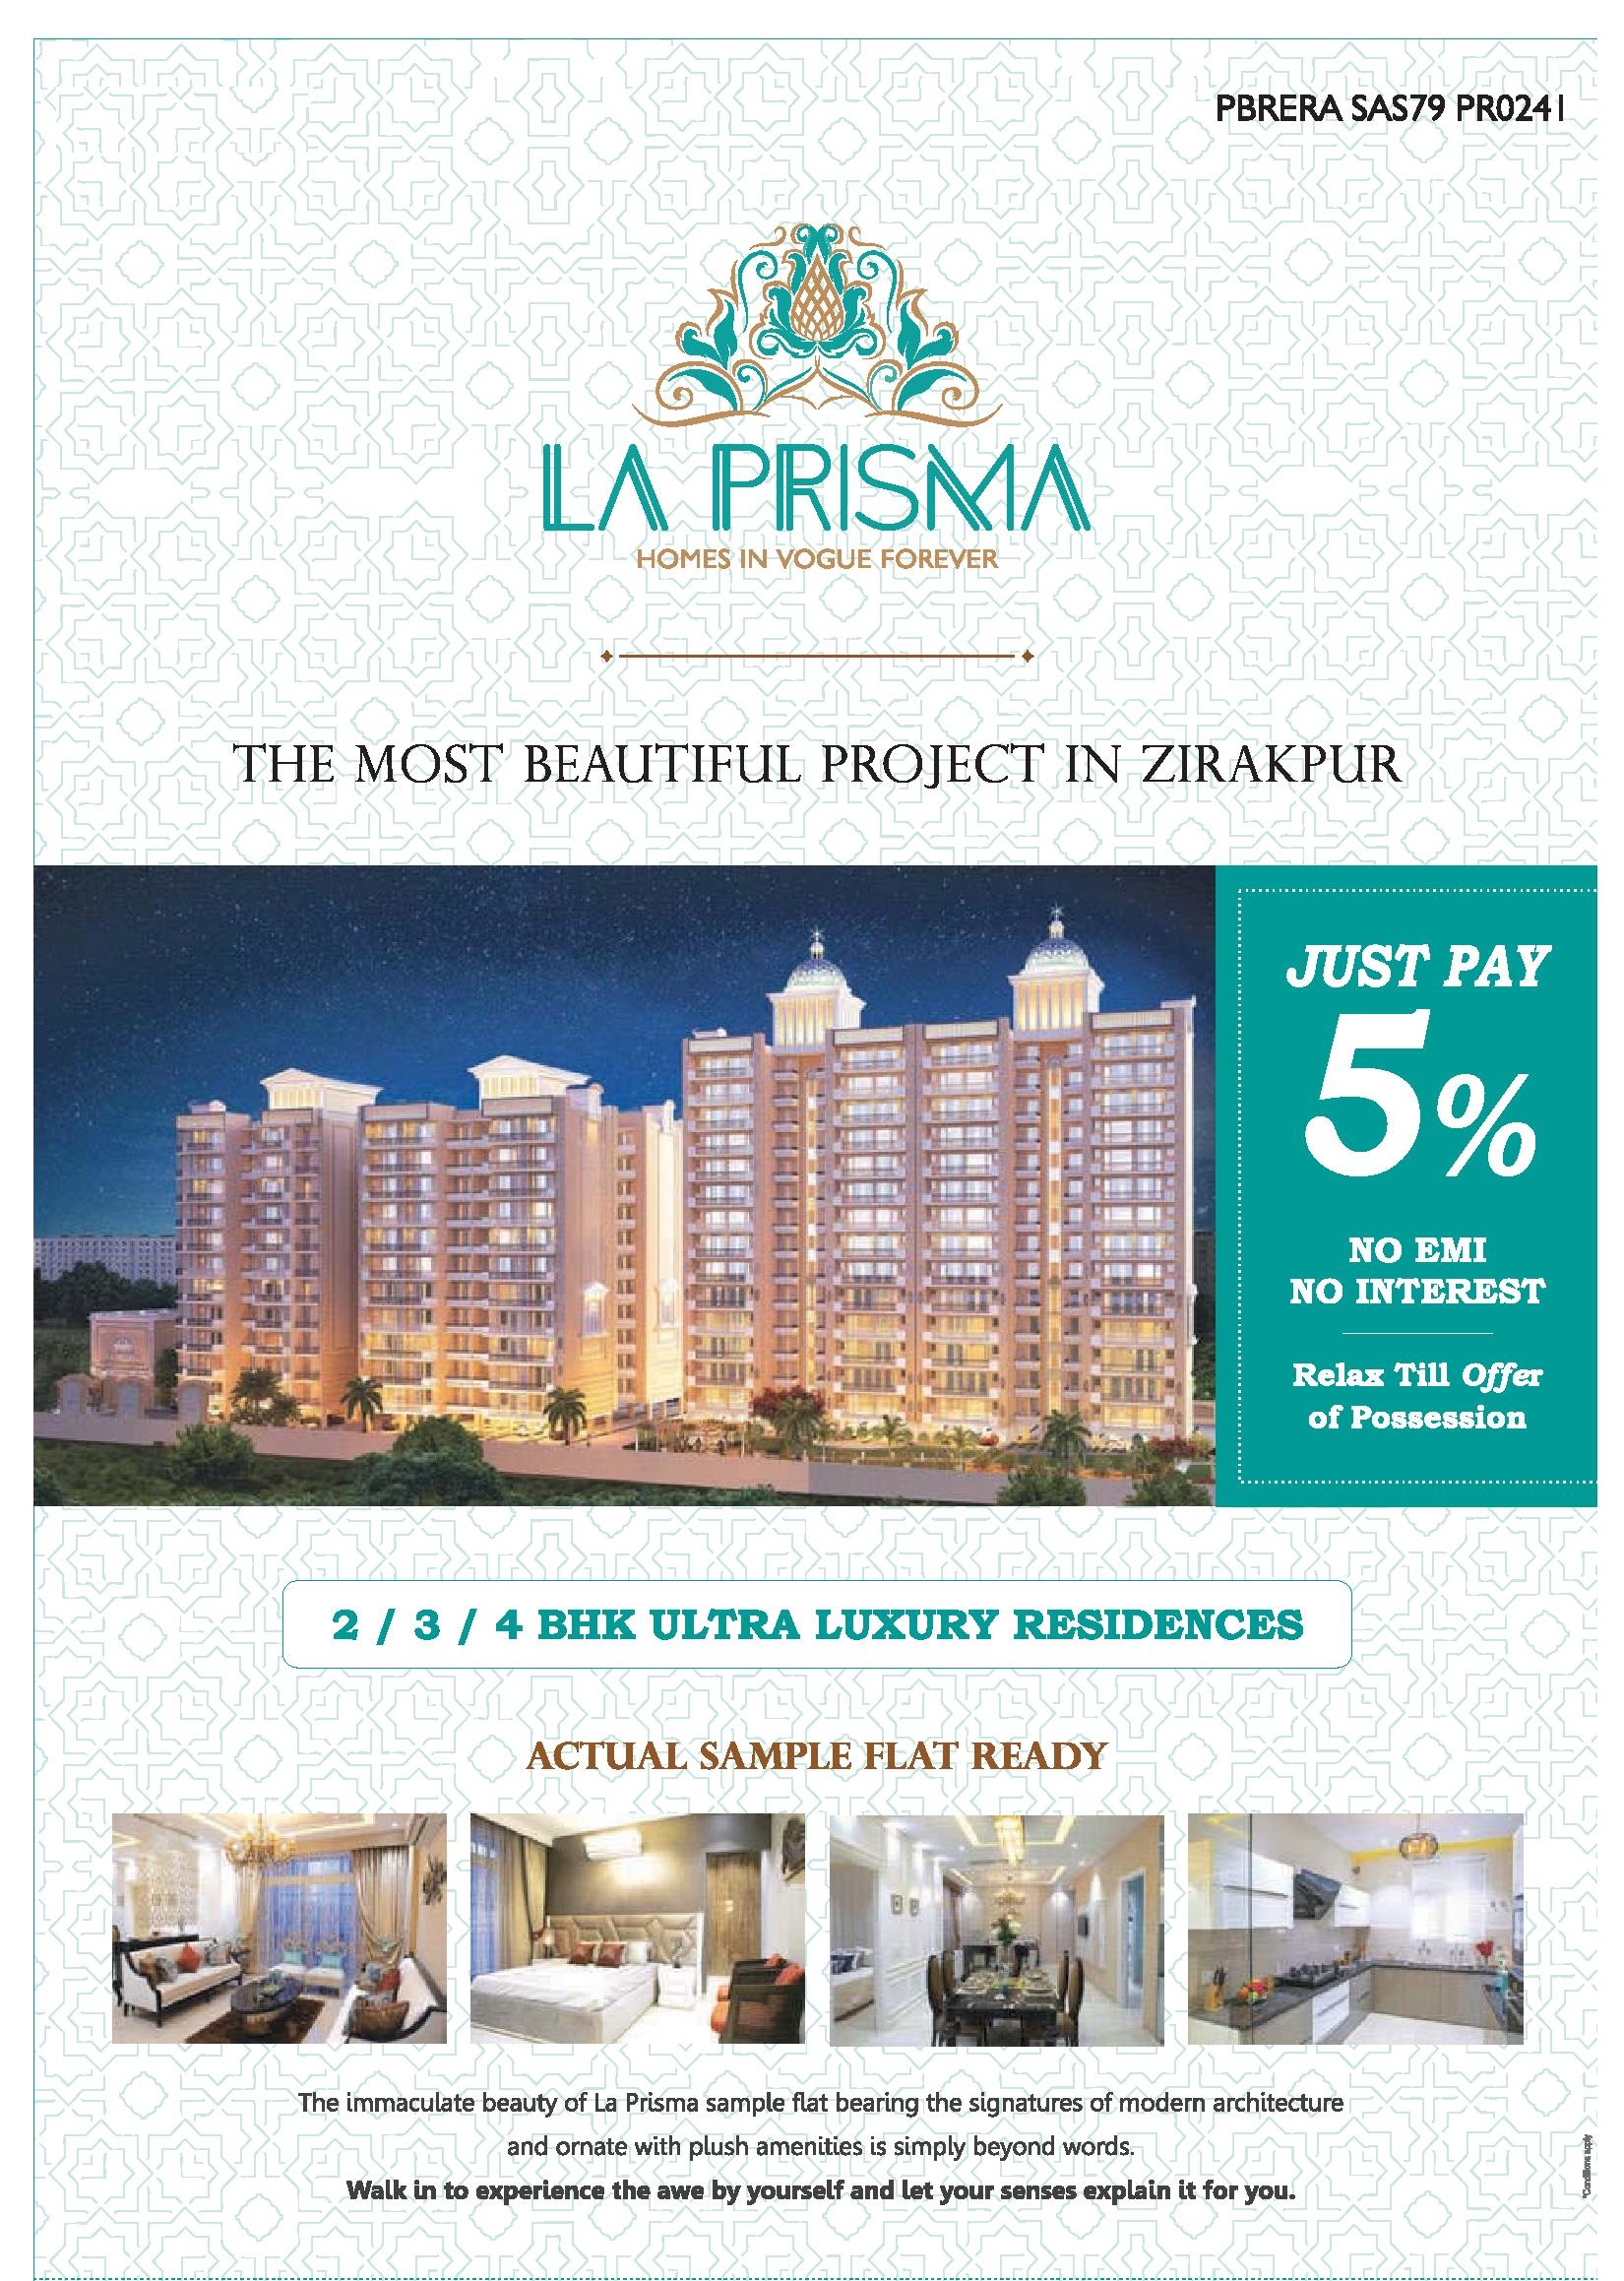 Avail 2/3/4 bhk ultra luxury residences at United La Prisma in Chandigarh